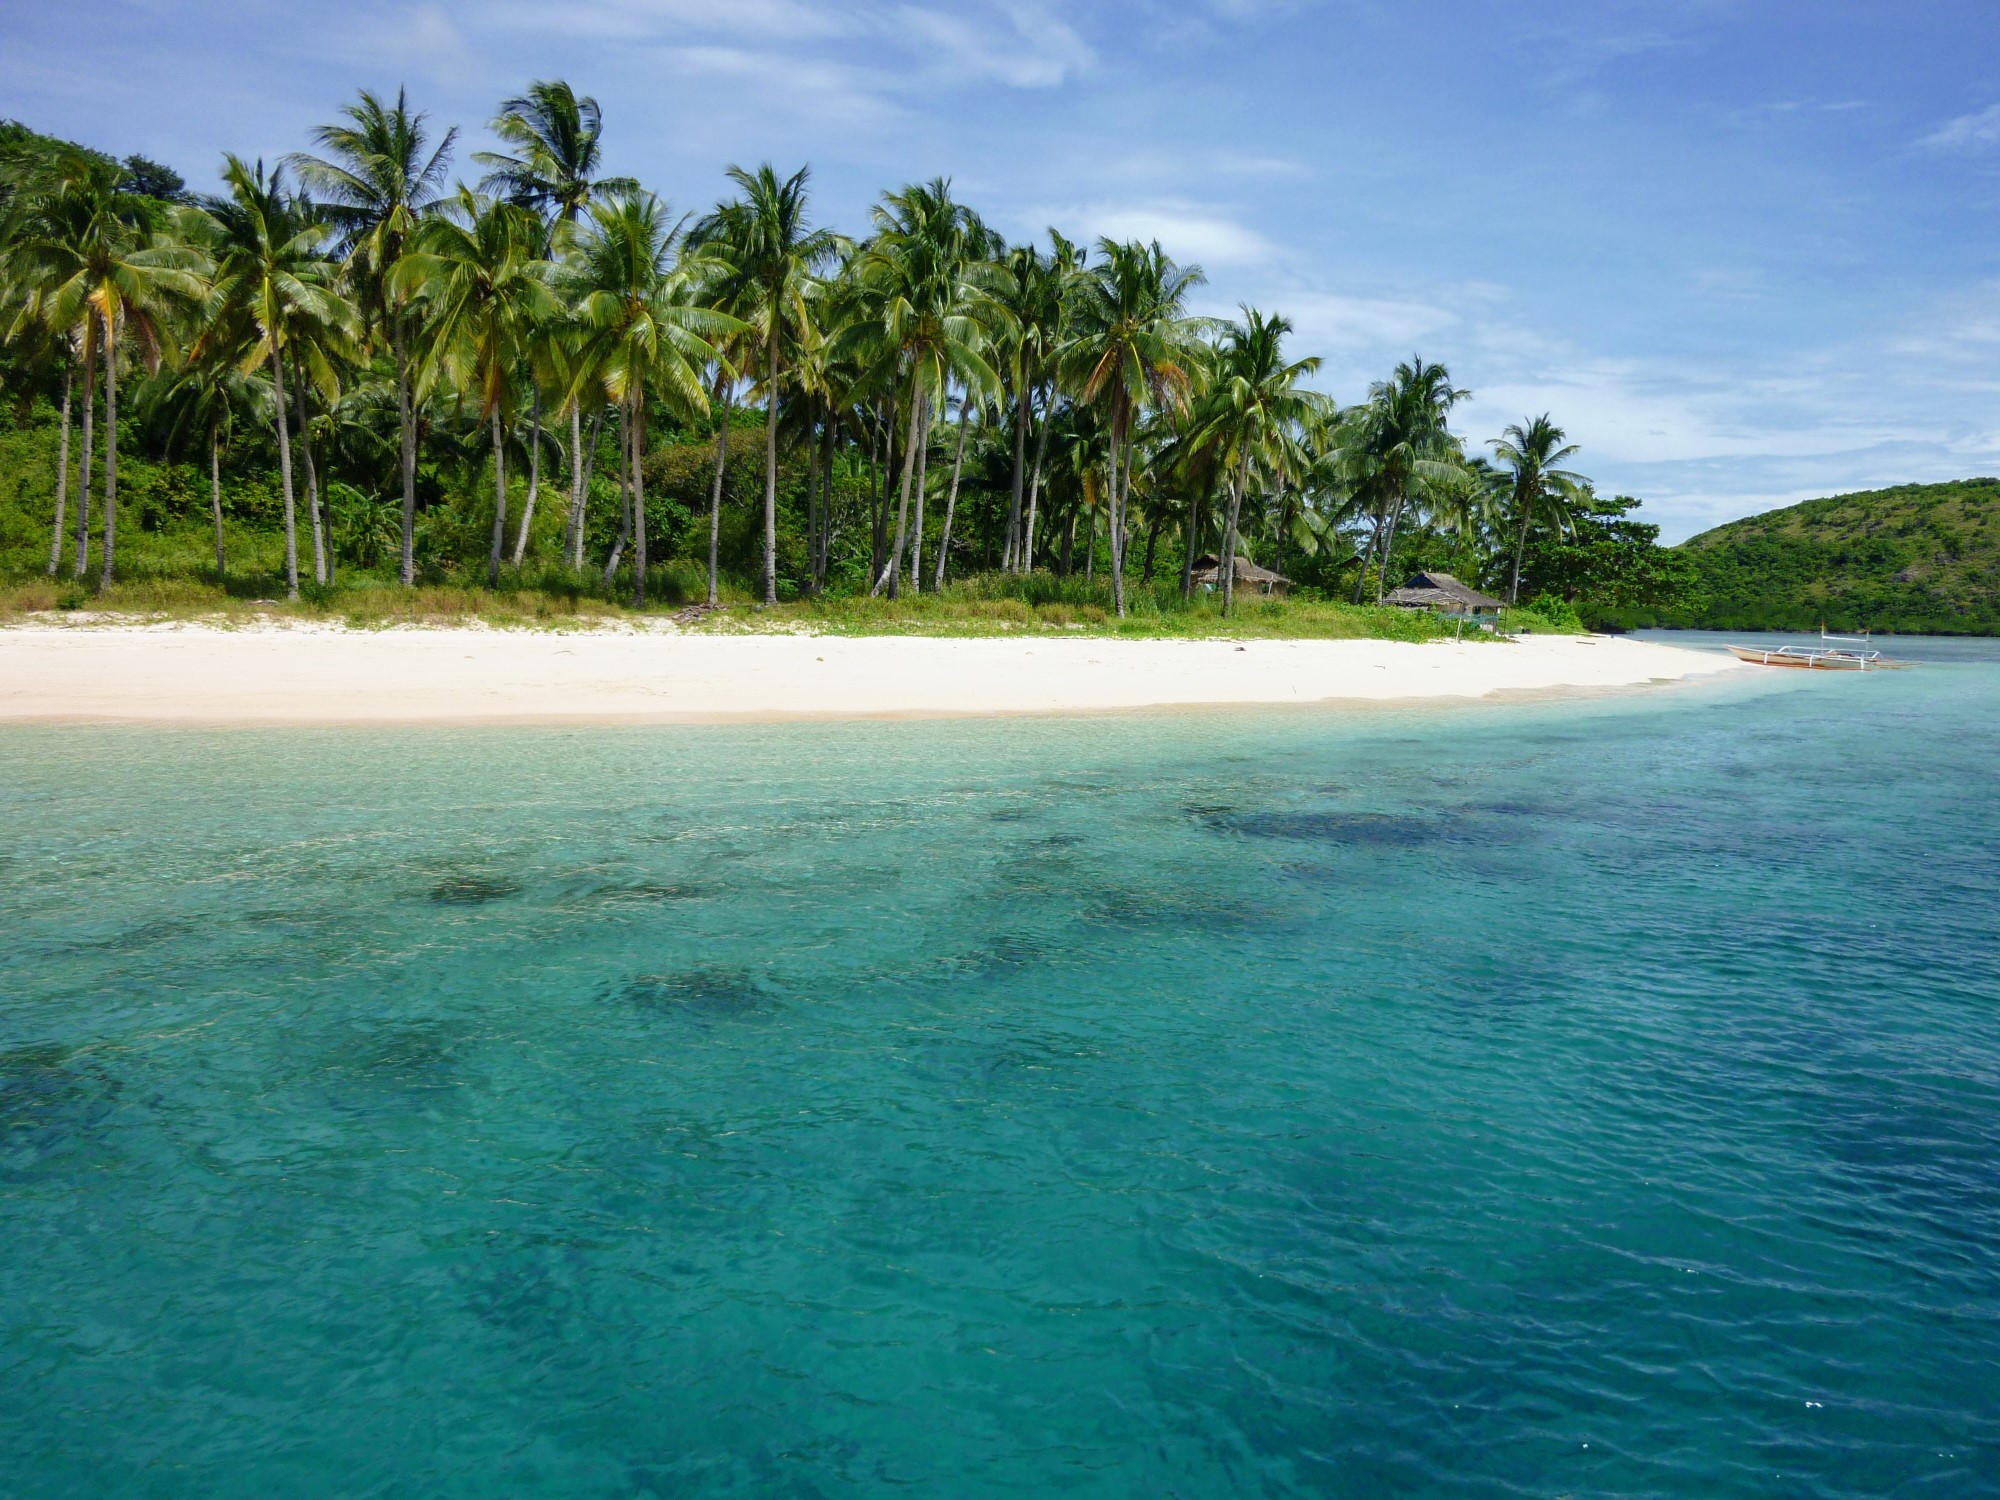 Tropical island viewed from offshore, with forest of palm trees just behind a thin strip of white sand beach.